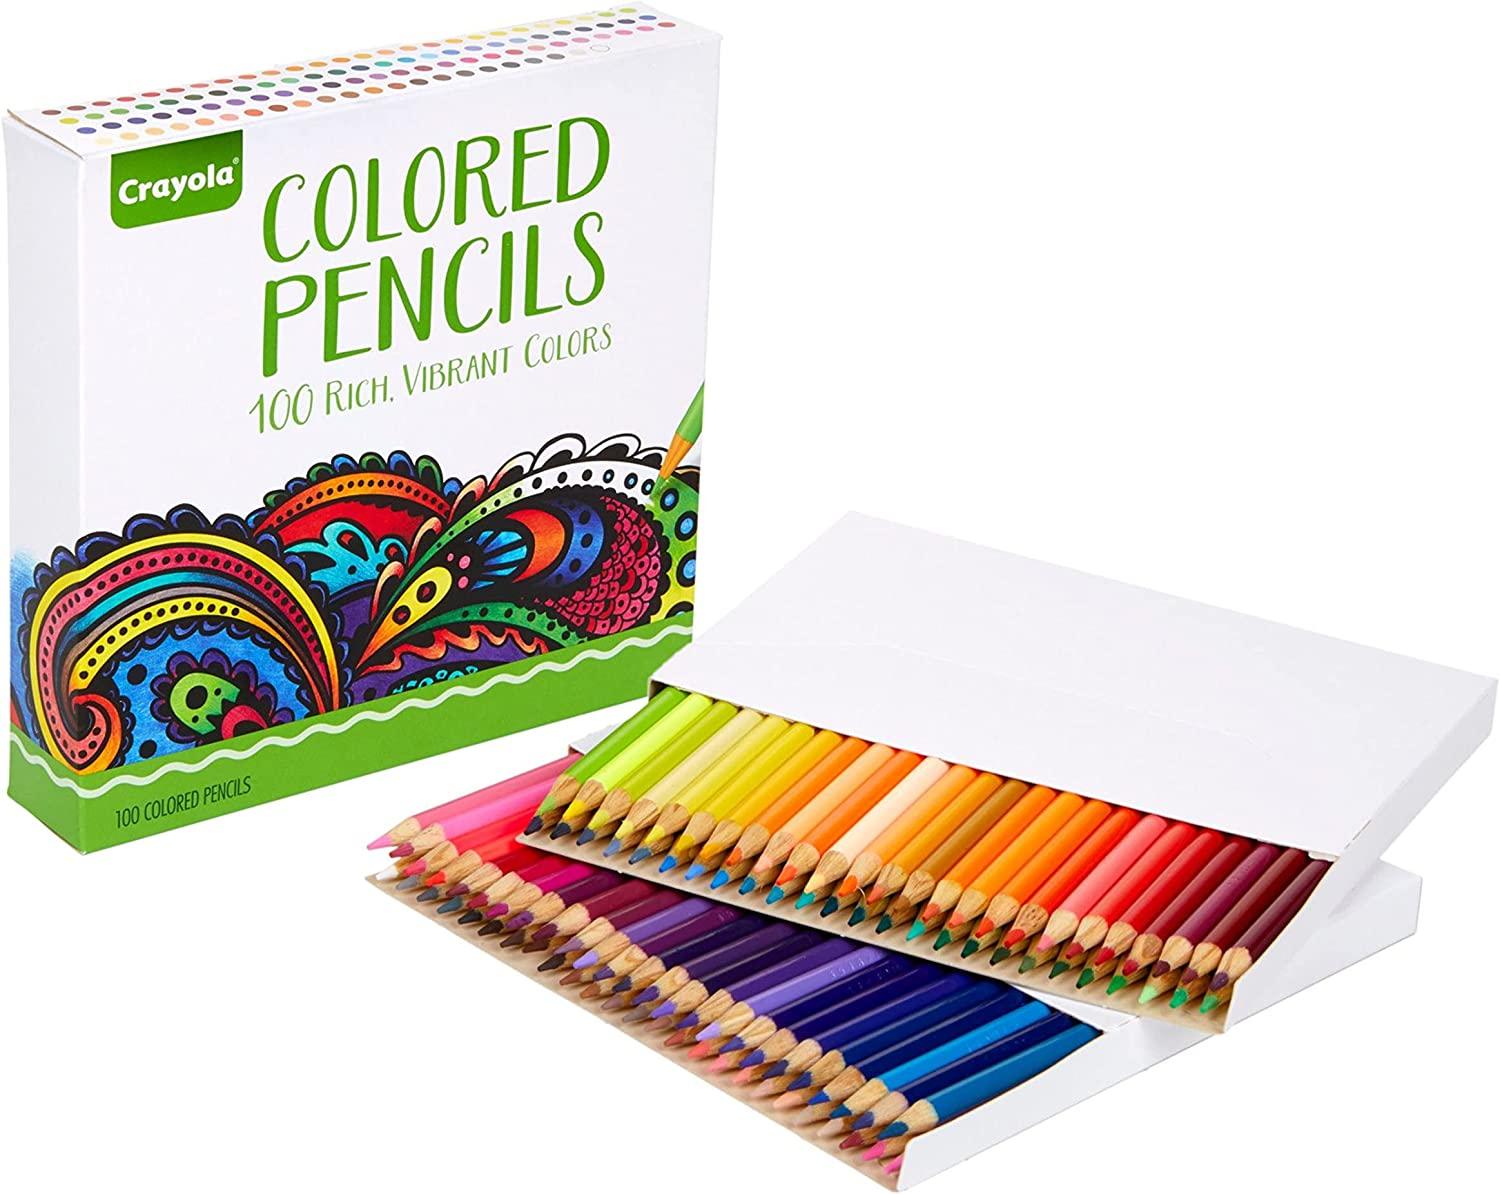 Crayola Adult Vibrant Colored Pencils for $11.94